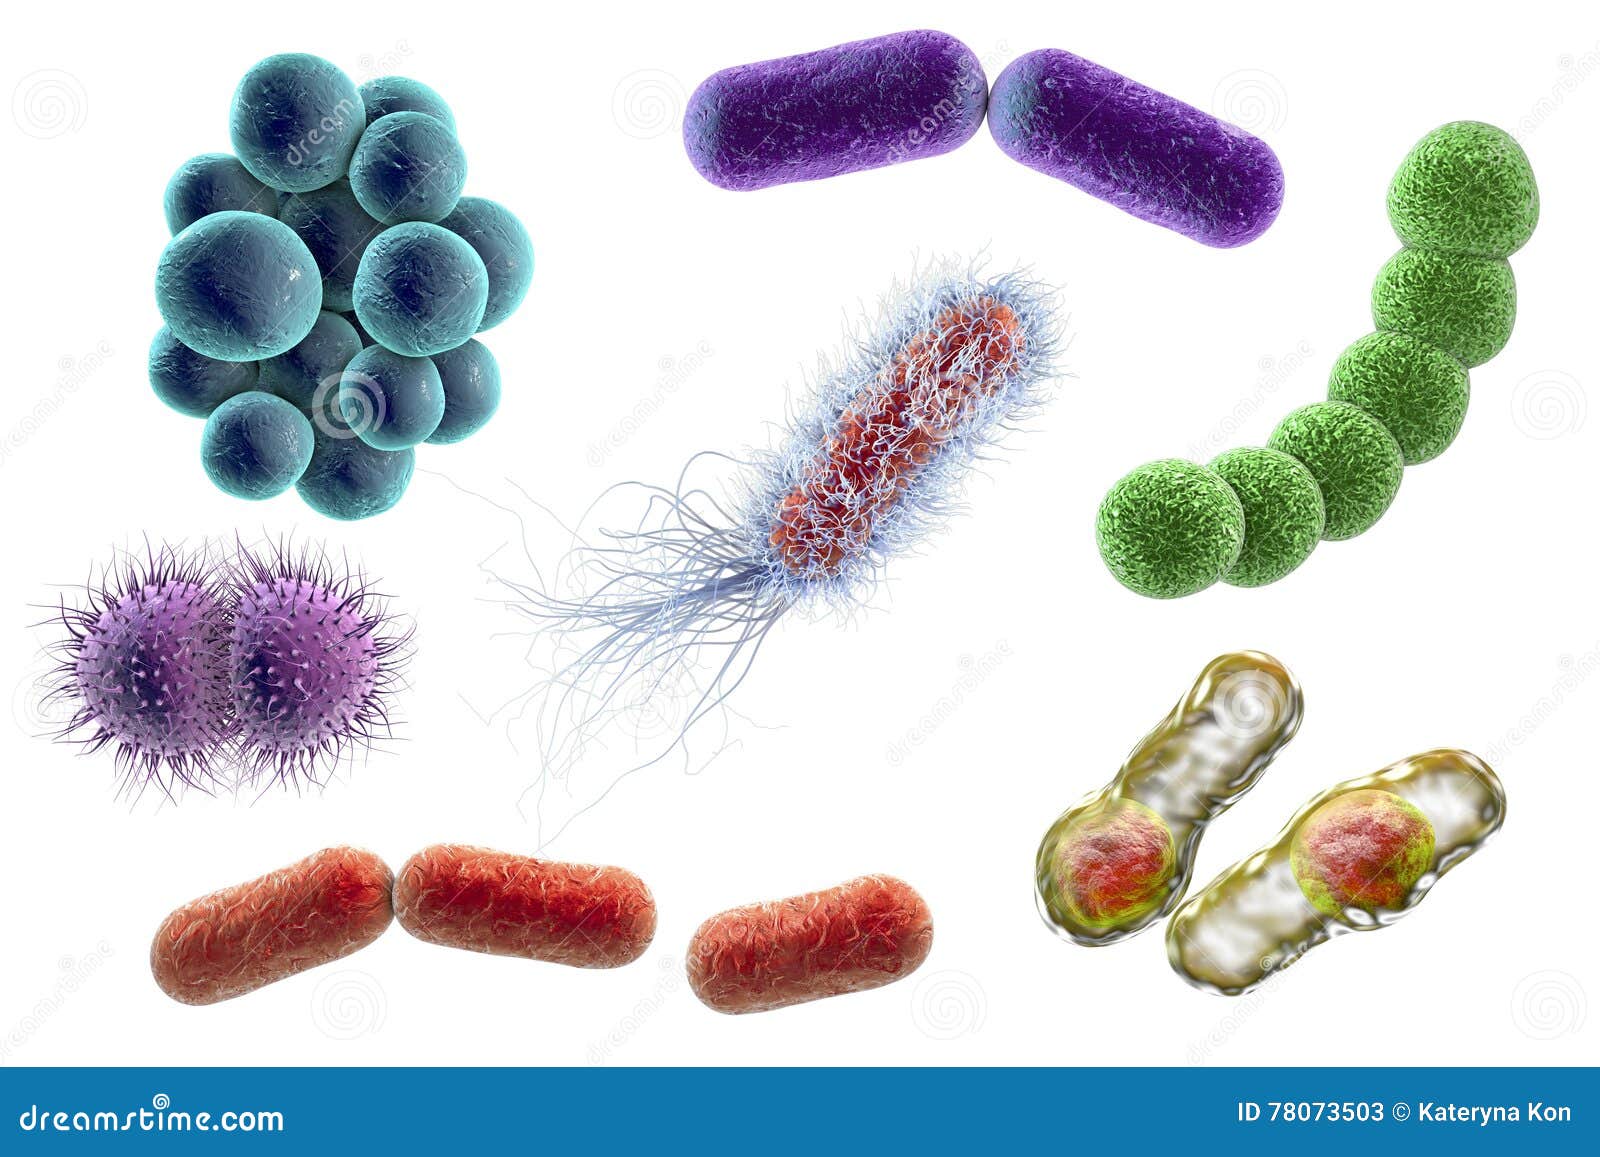 microbes of different s